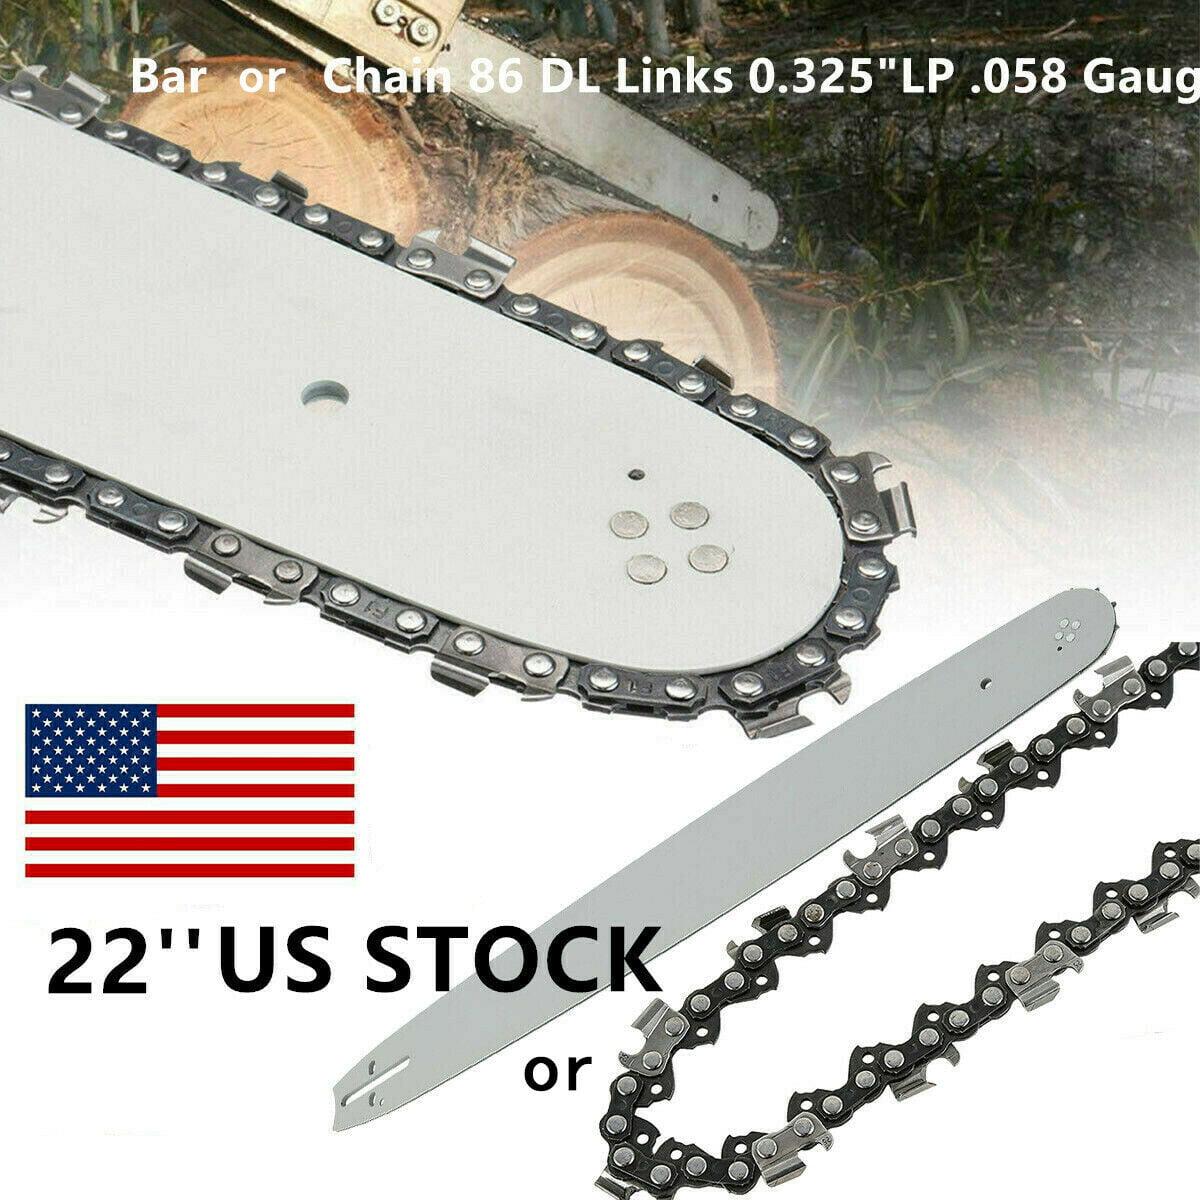 Replacement 18" Chainsaw Saw Chain Guide Bar 72DL 0.325" Pitch .058 Gauge